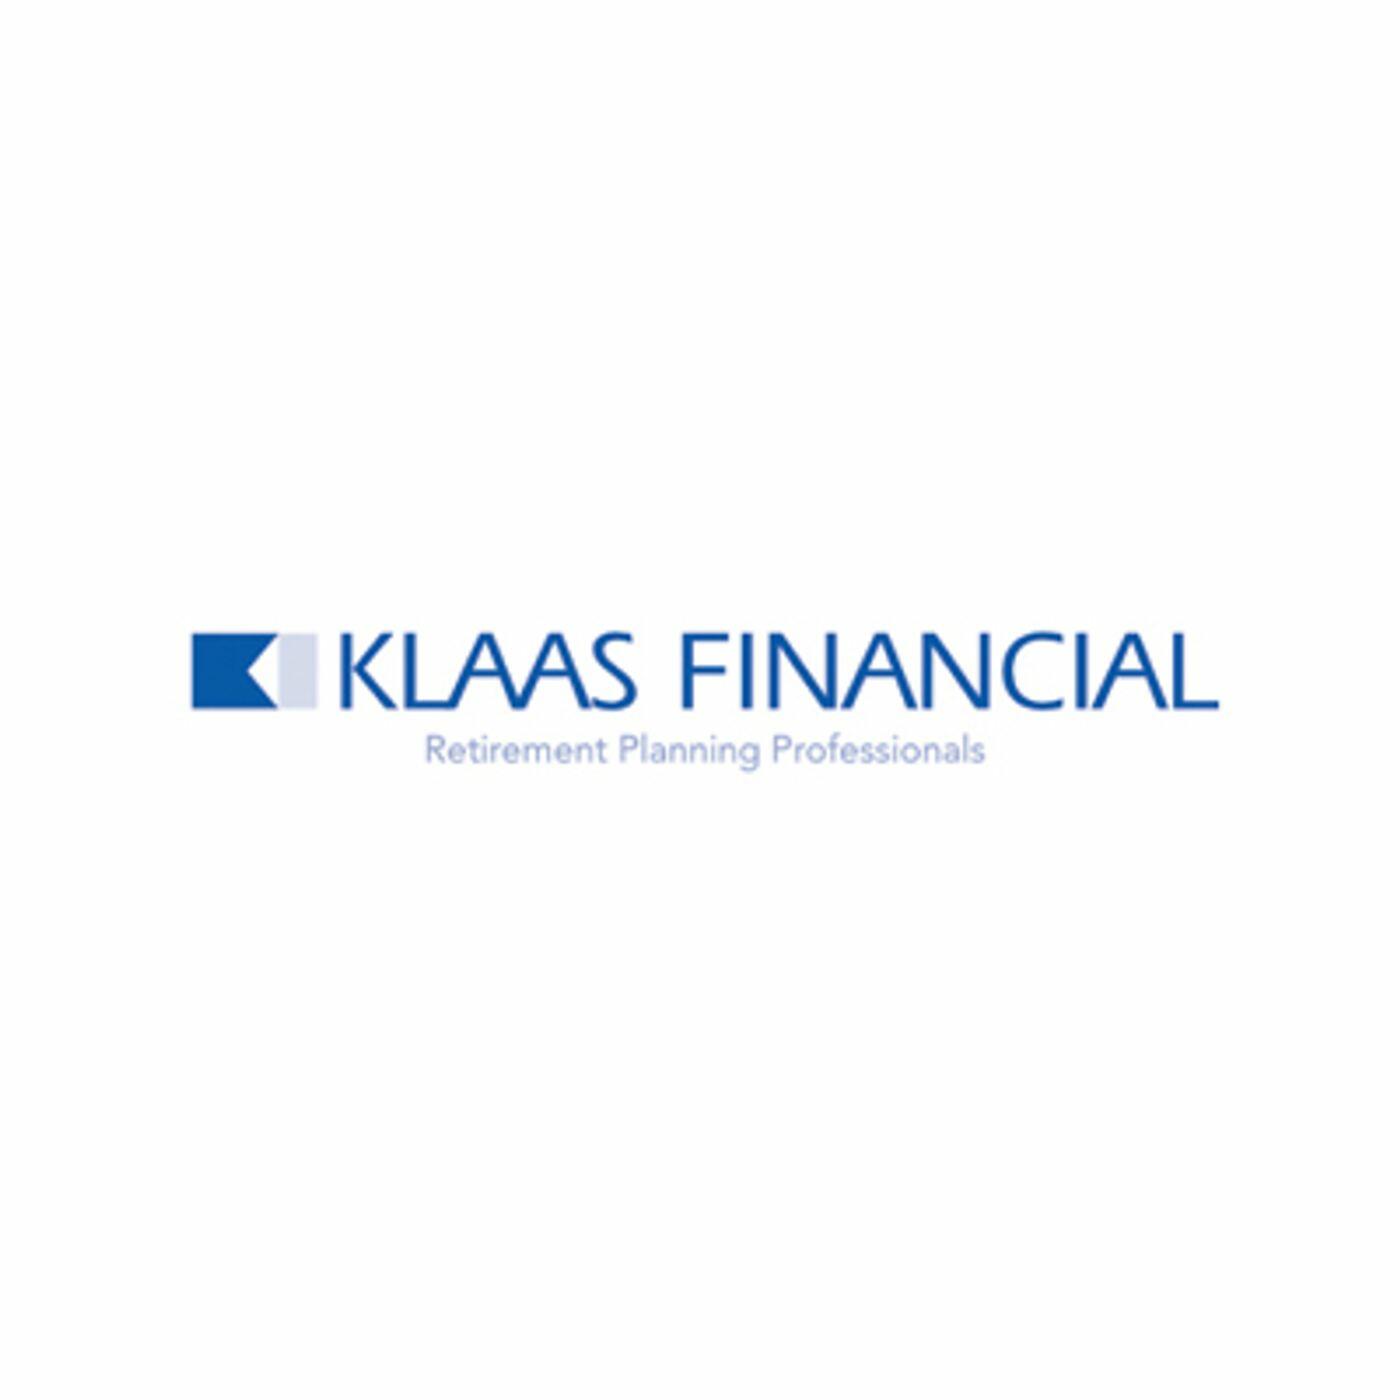 Listen to the Money In Motion with Klaas Financial Episode - Klaas Financial, Who They ...1400 x 1400